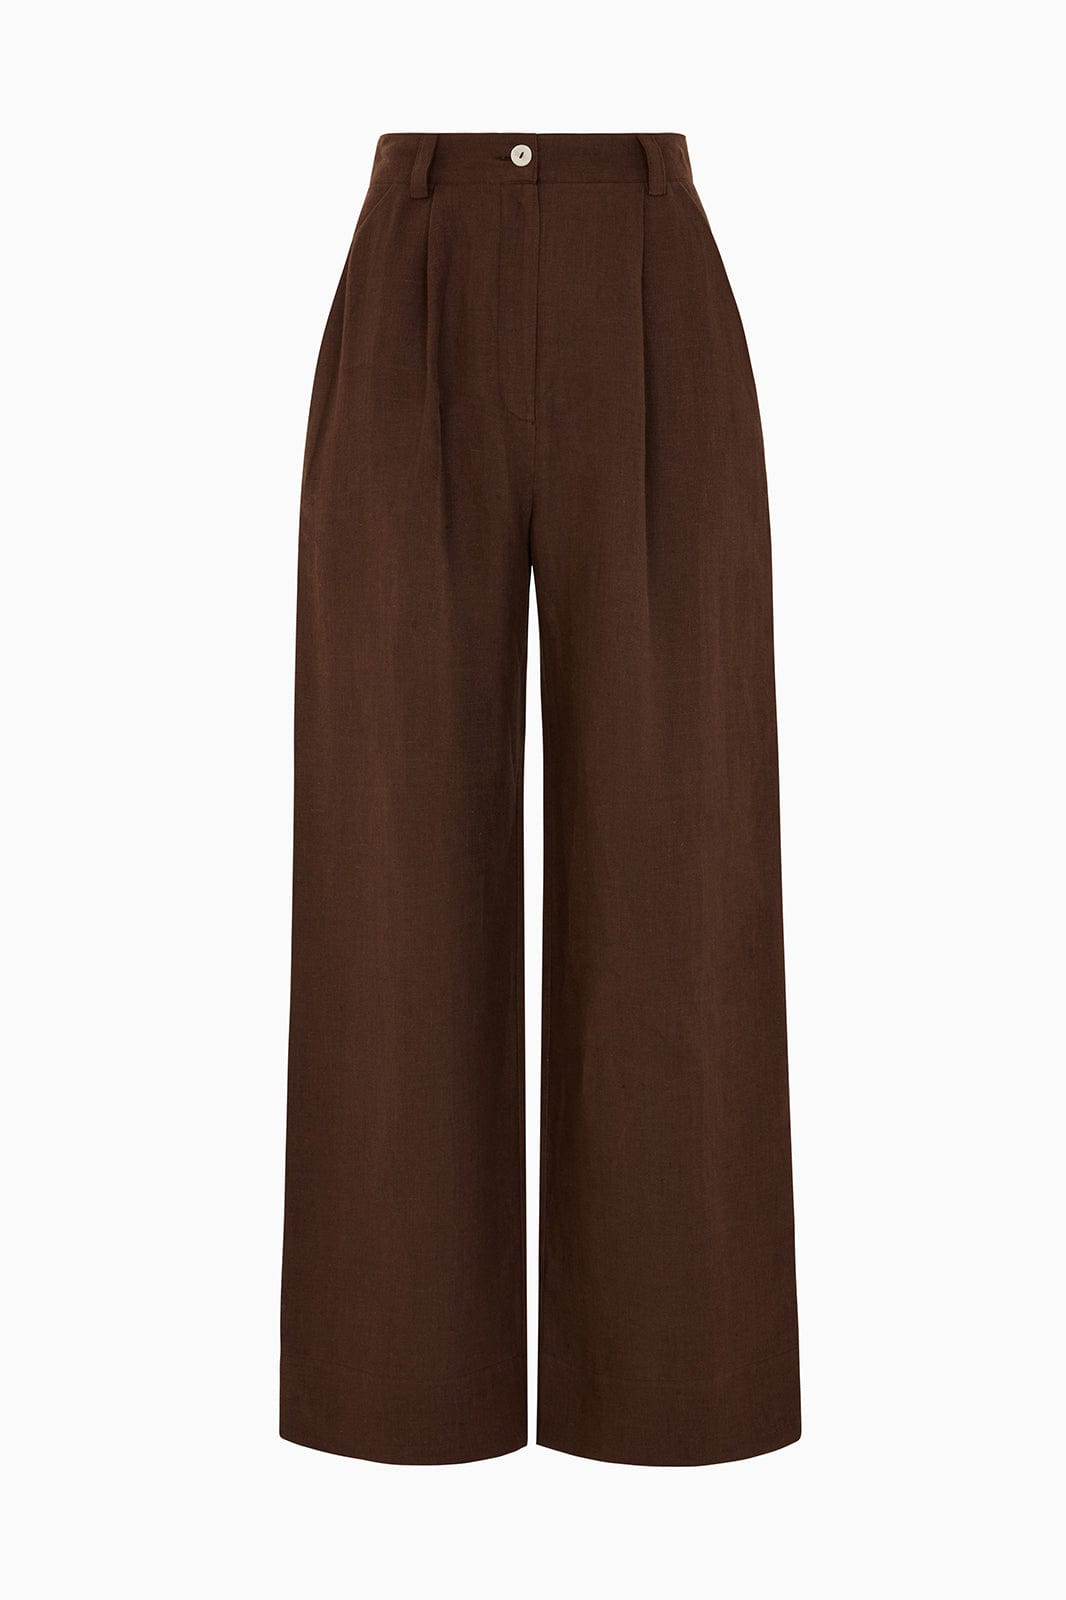 arkitaip - The Wabi Pleated Linen Trousers in chocolate